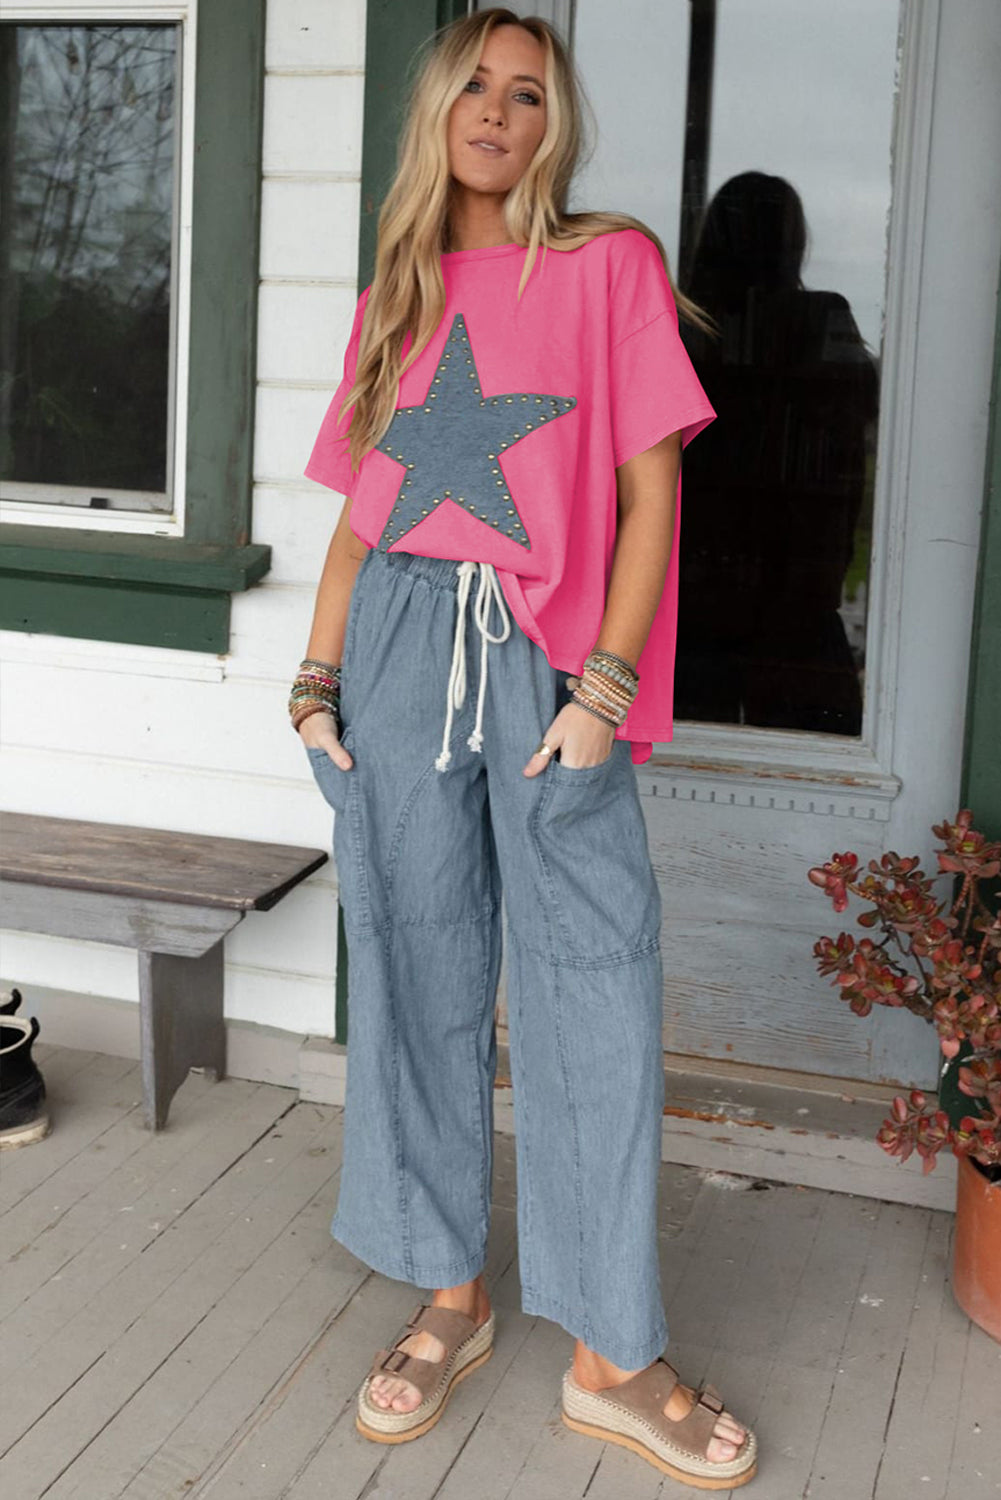 Sachet Pink Mineral Wash Studded Star Patch Graphic High Low Tee Pre Order Tops JT's Designer Fashion